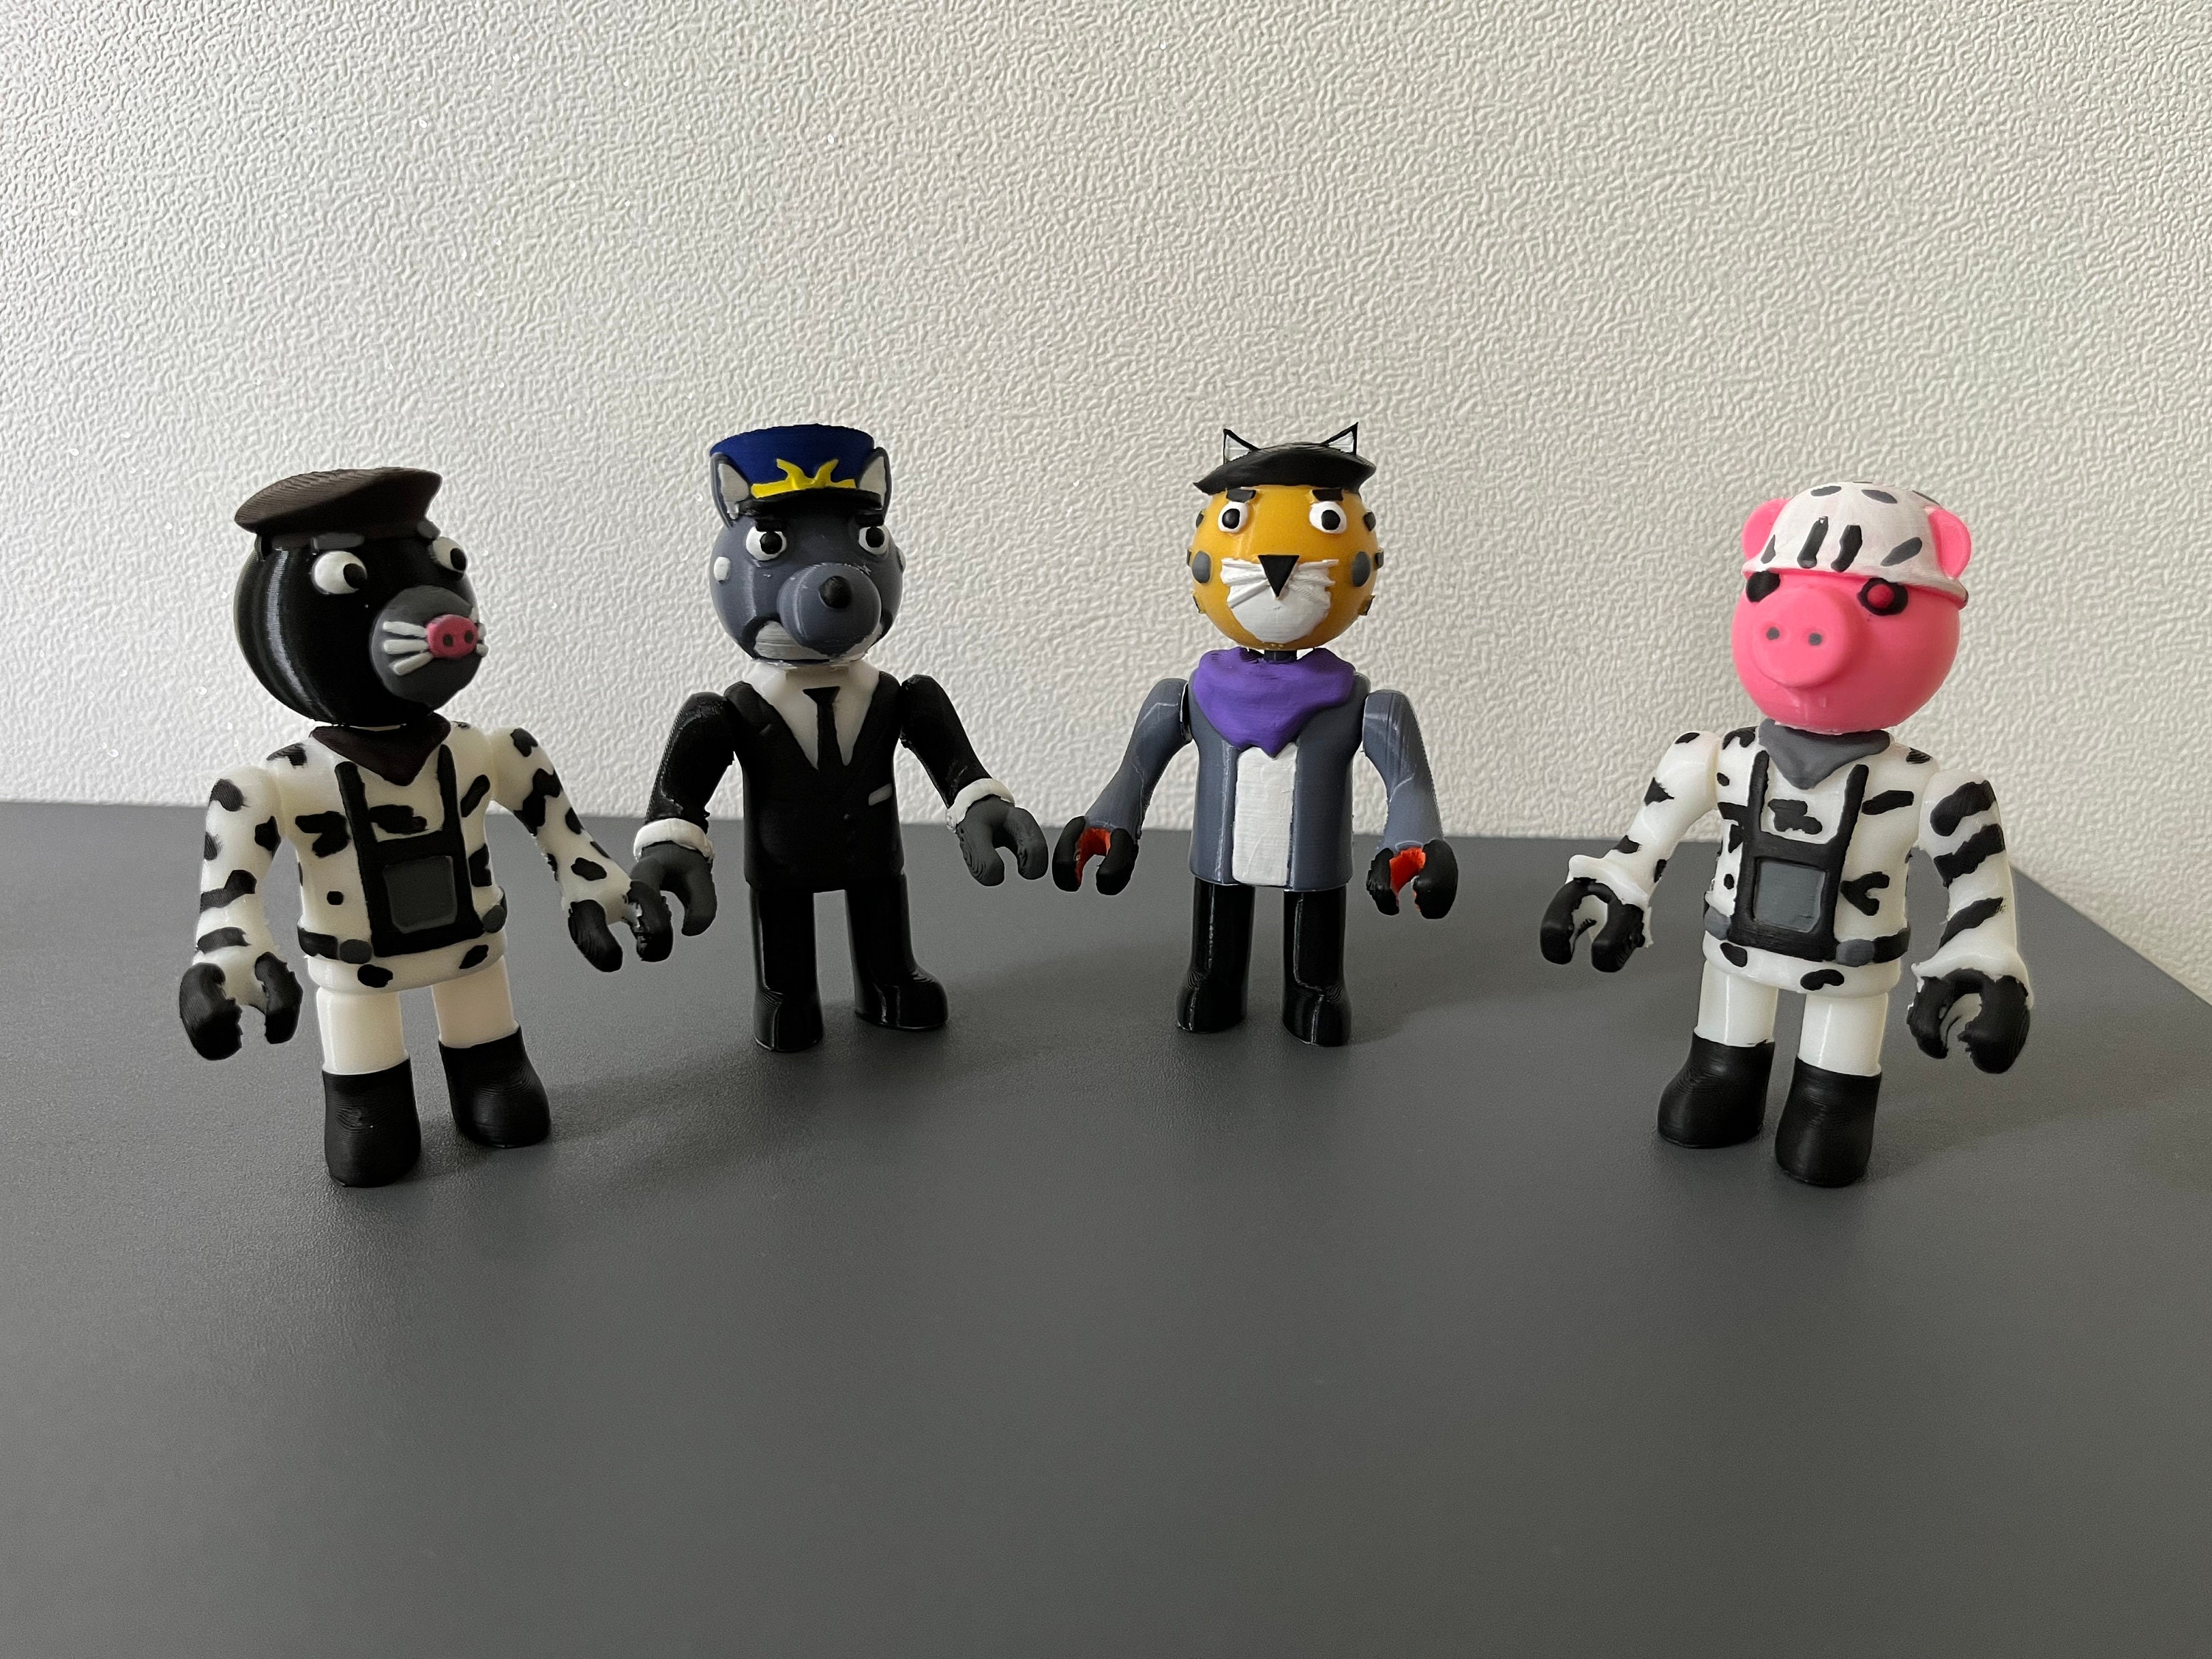 Piggy Roblox: Piggy Roblox Characters, Toys, Fanart and More